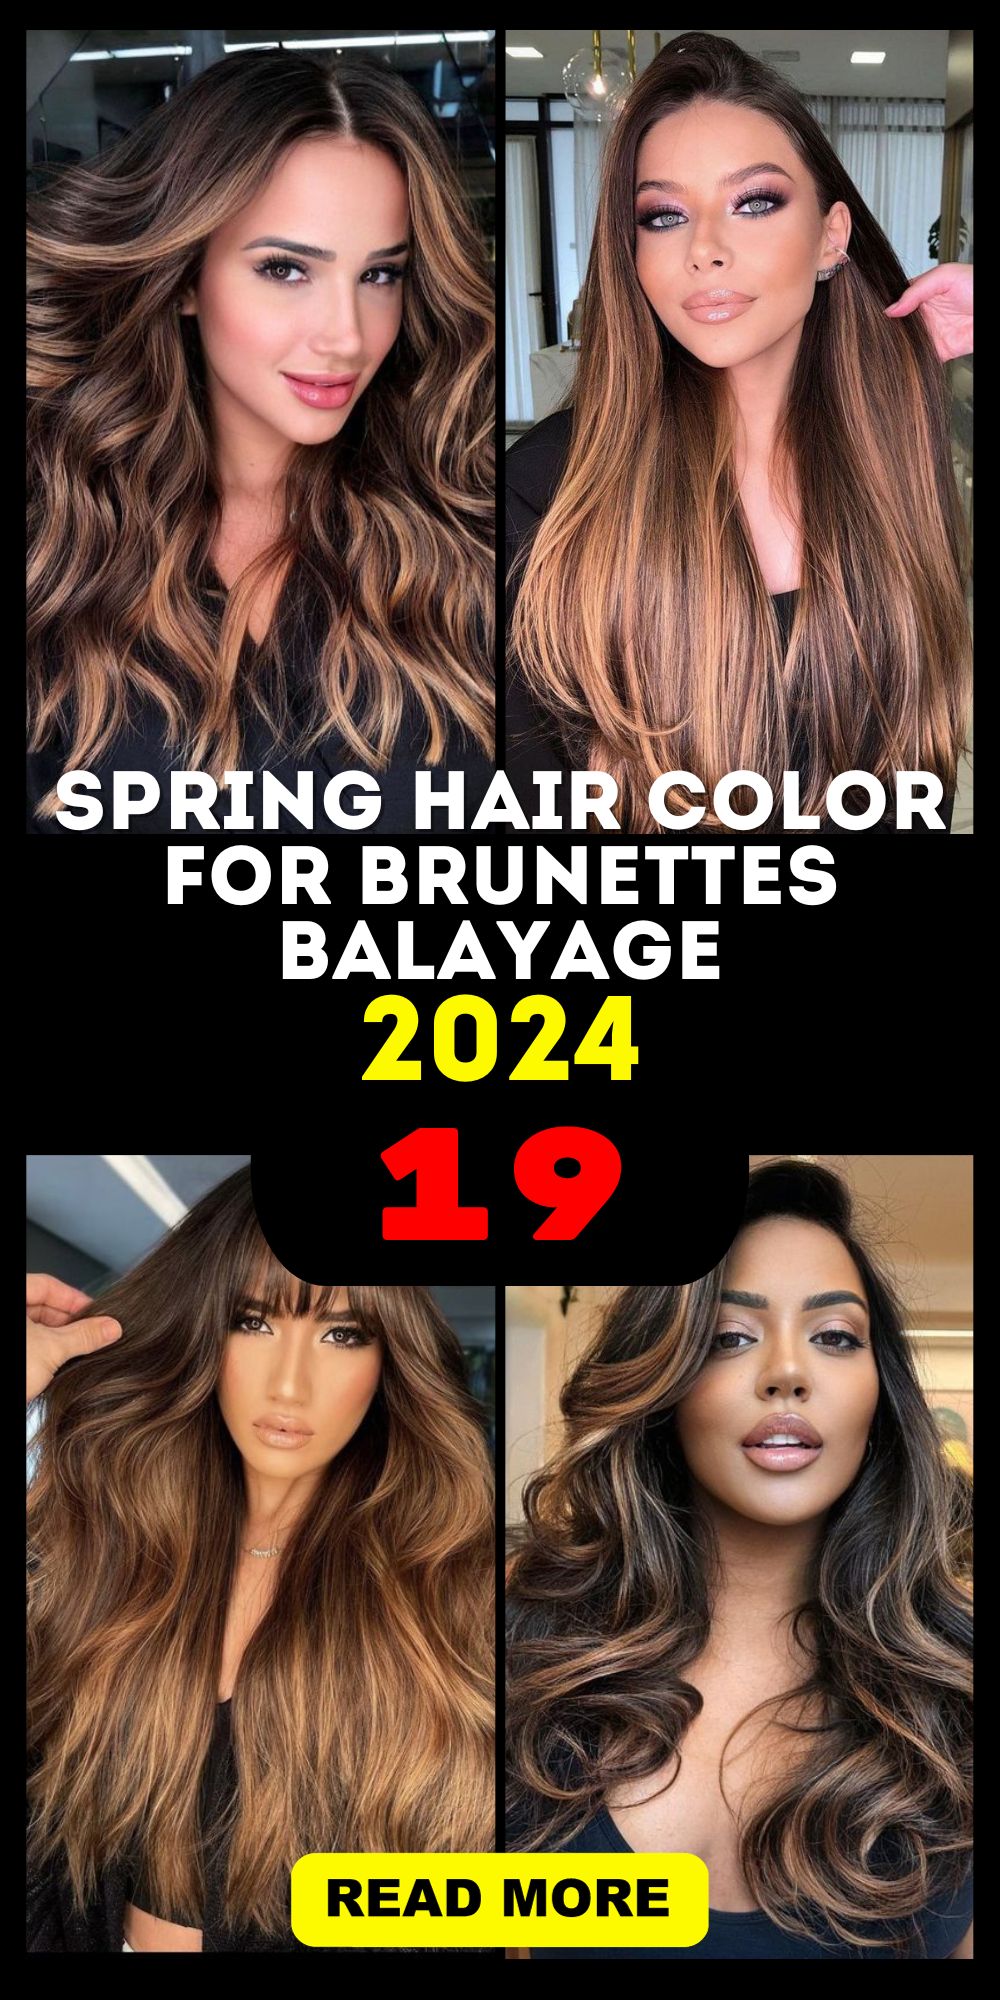 Discover the Top Balayage Trends for a Stylish Spring 2024